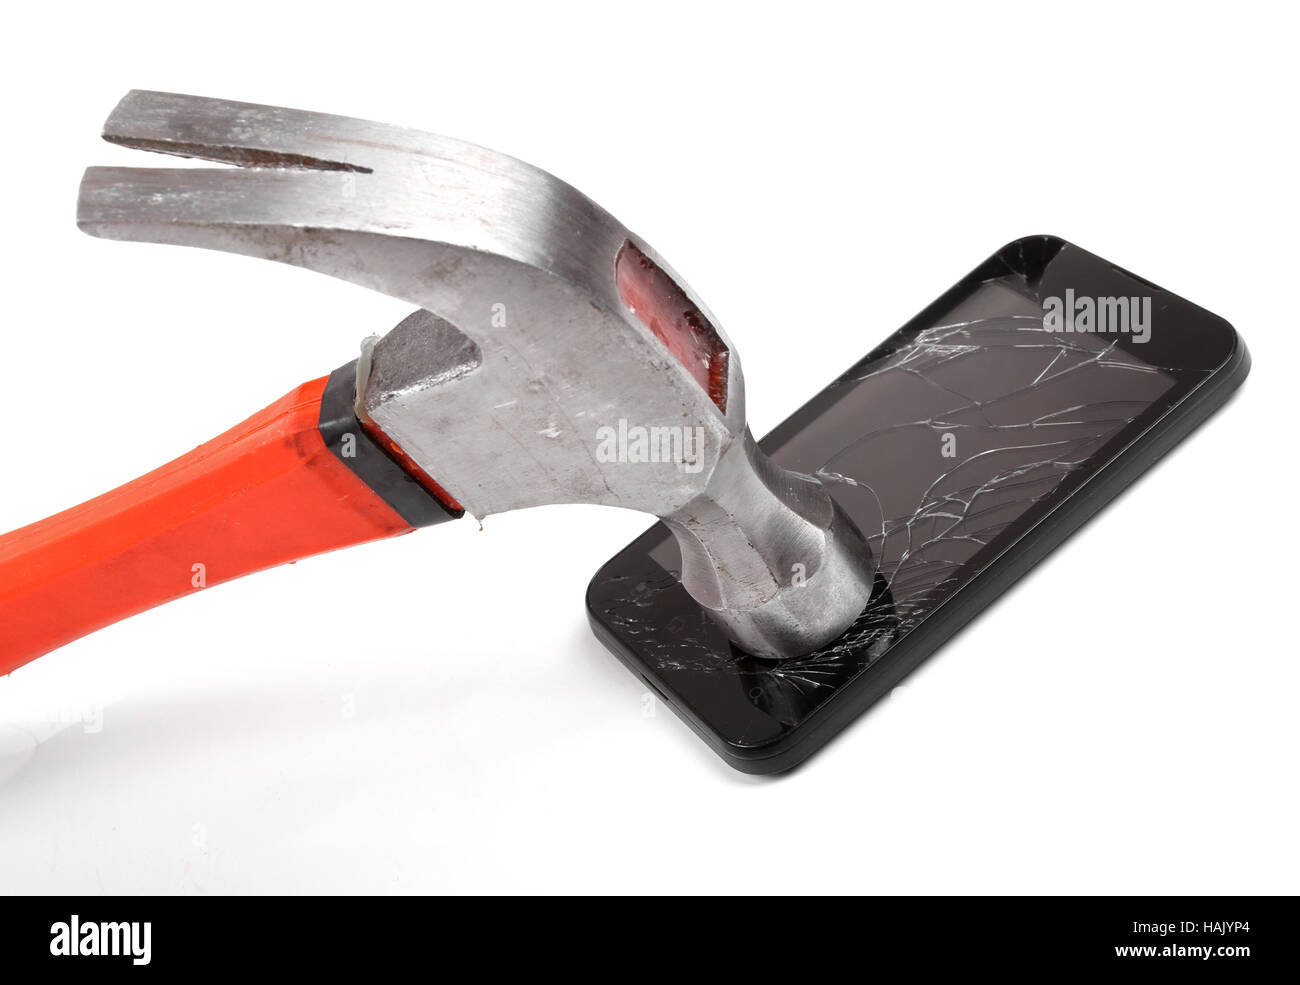 hammer and smartphone with smashed display Stock Photo